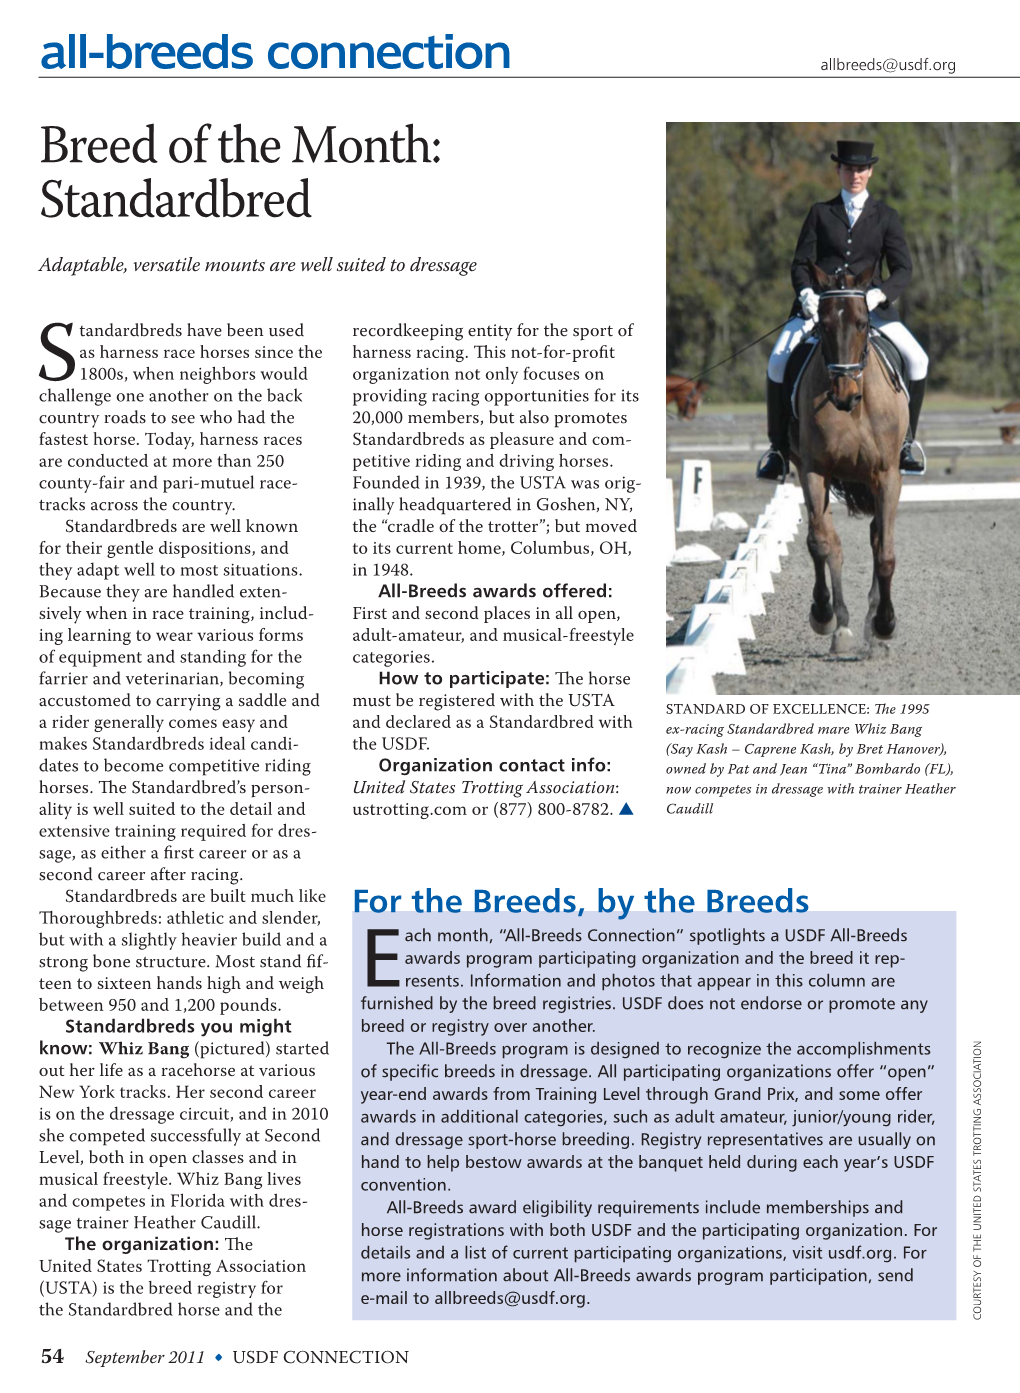 Breed of the Month: Standardbred Adaptable, Versatile Mounts Are Well Suited to Dressage